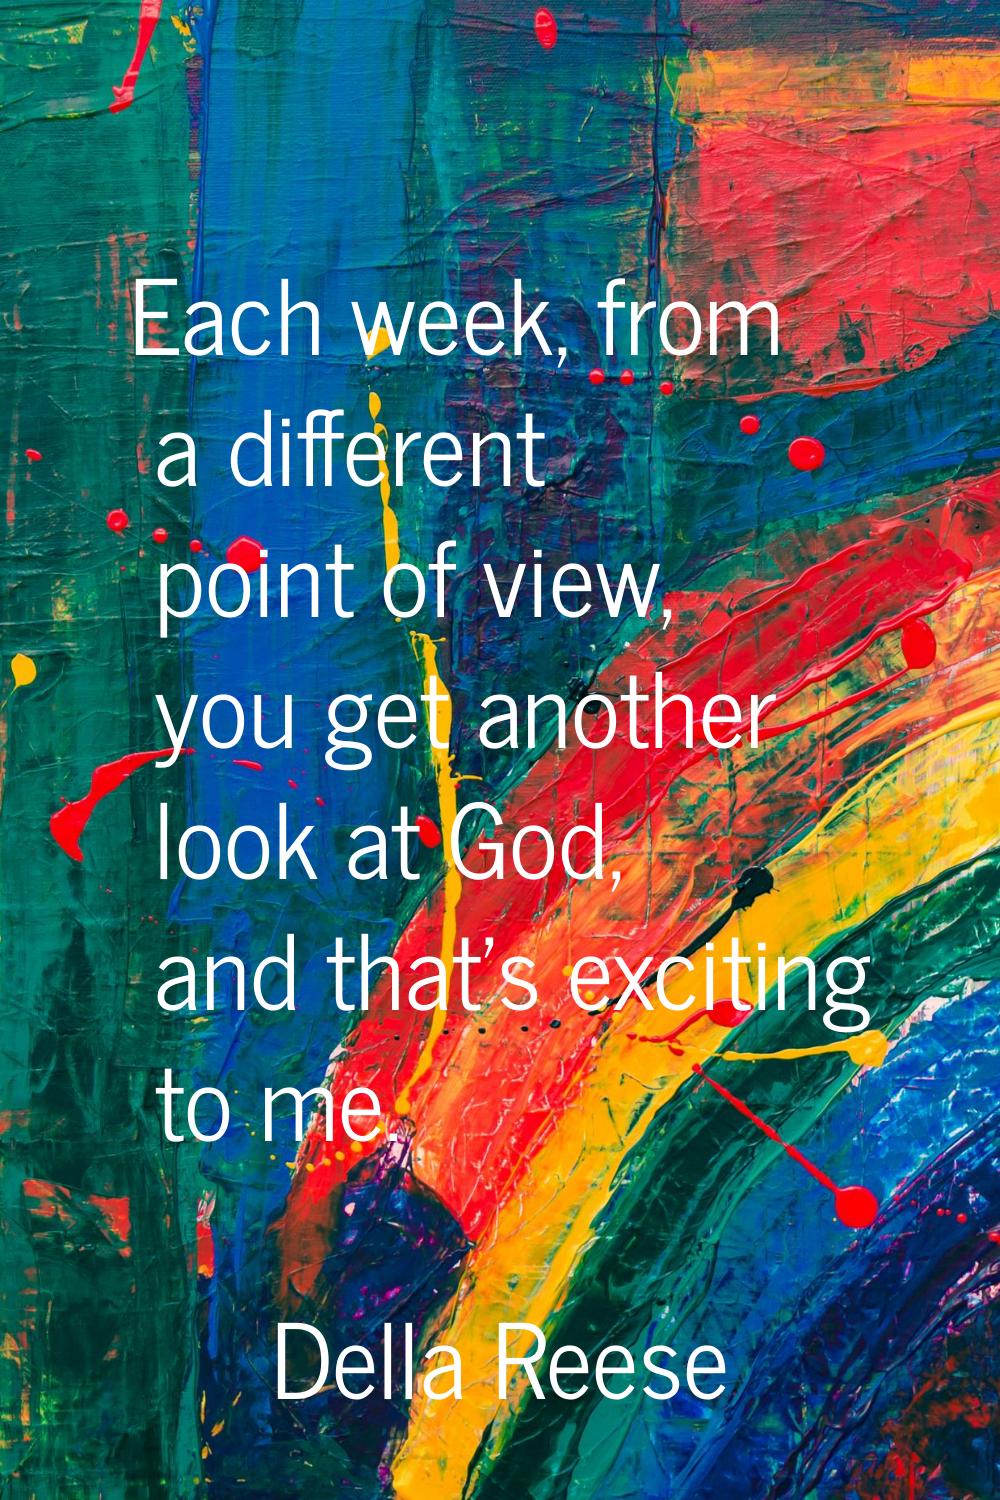 Each week, from a different point of view, you get another look at God, and that's exciting to me.